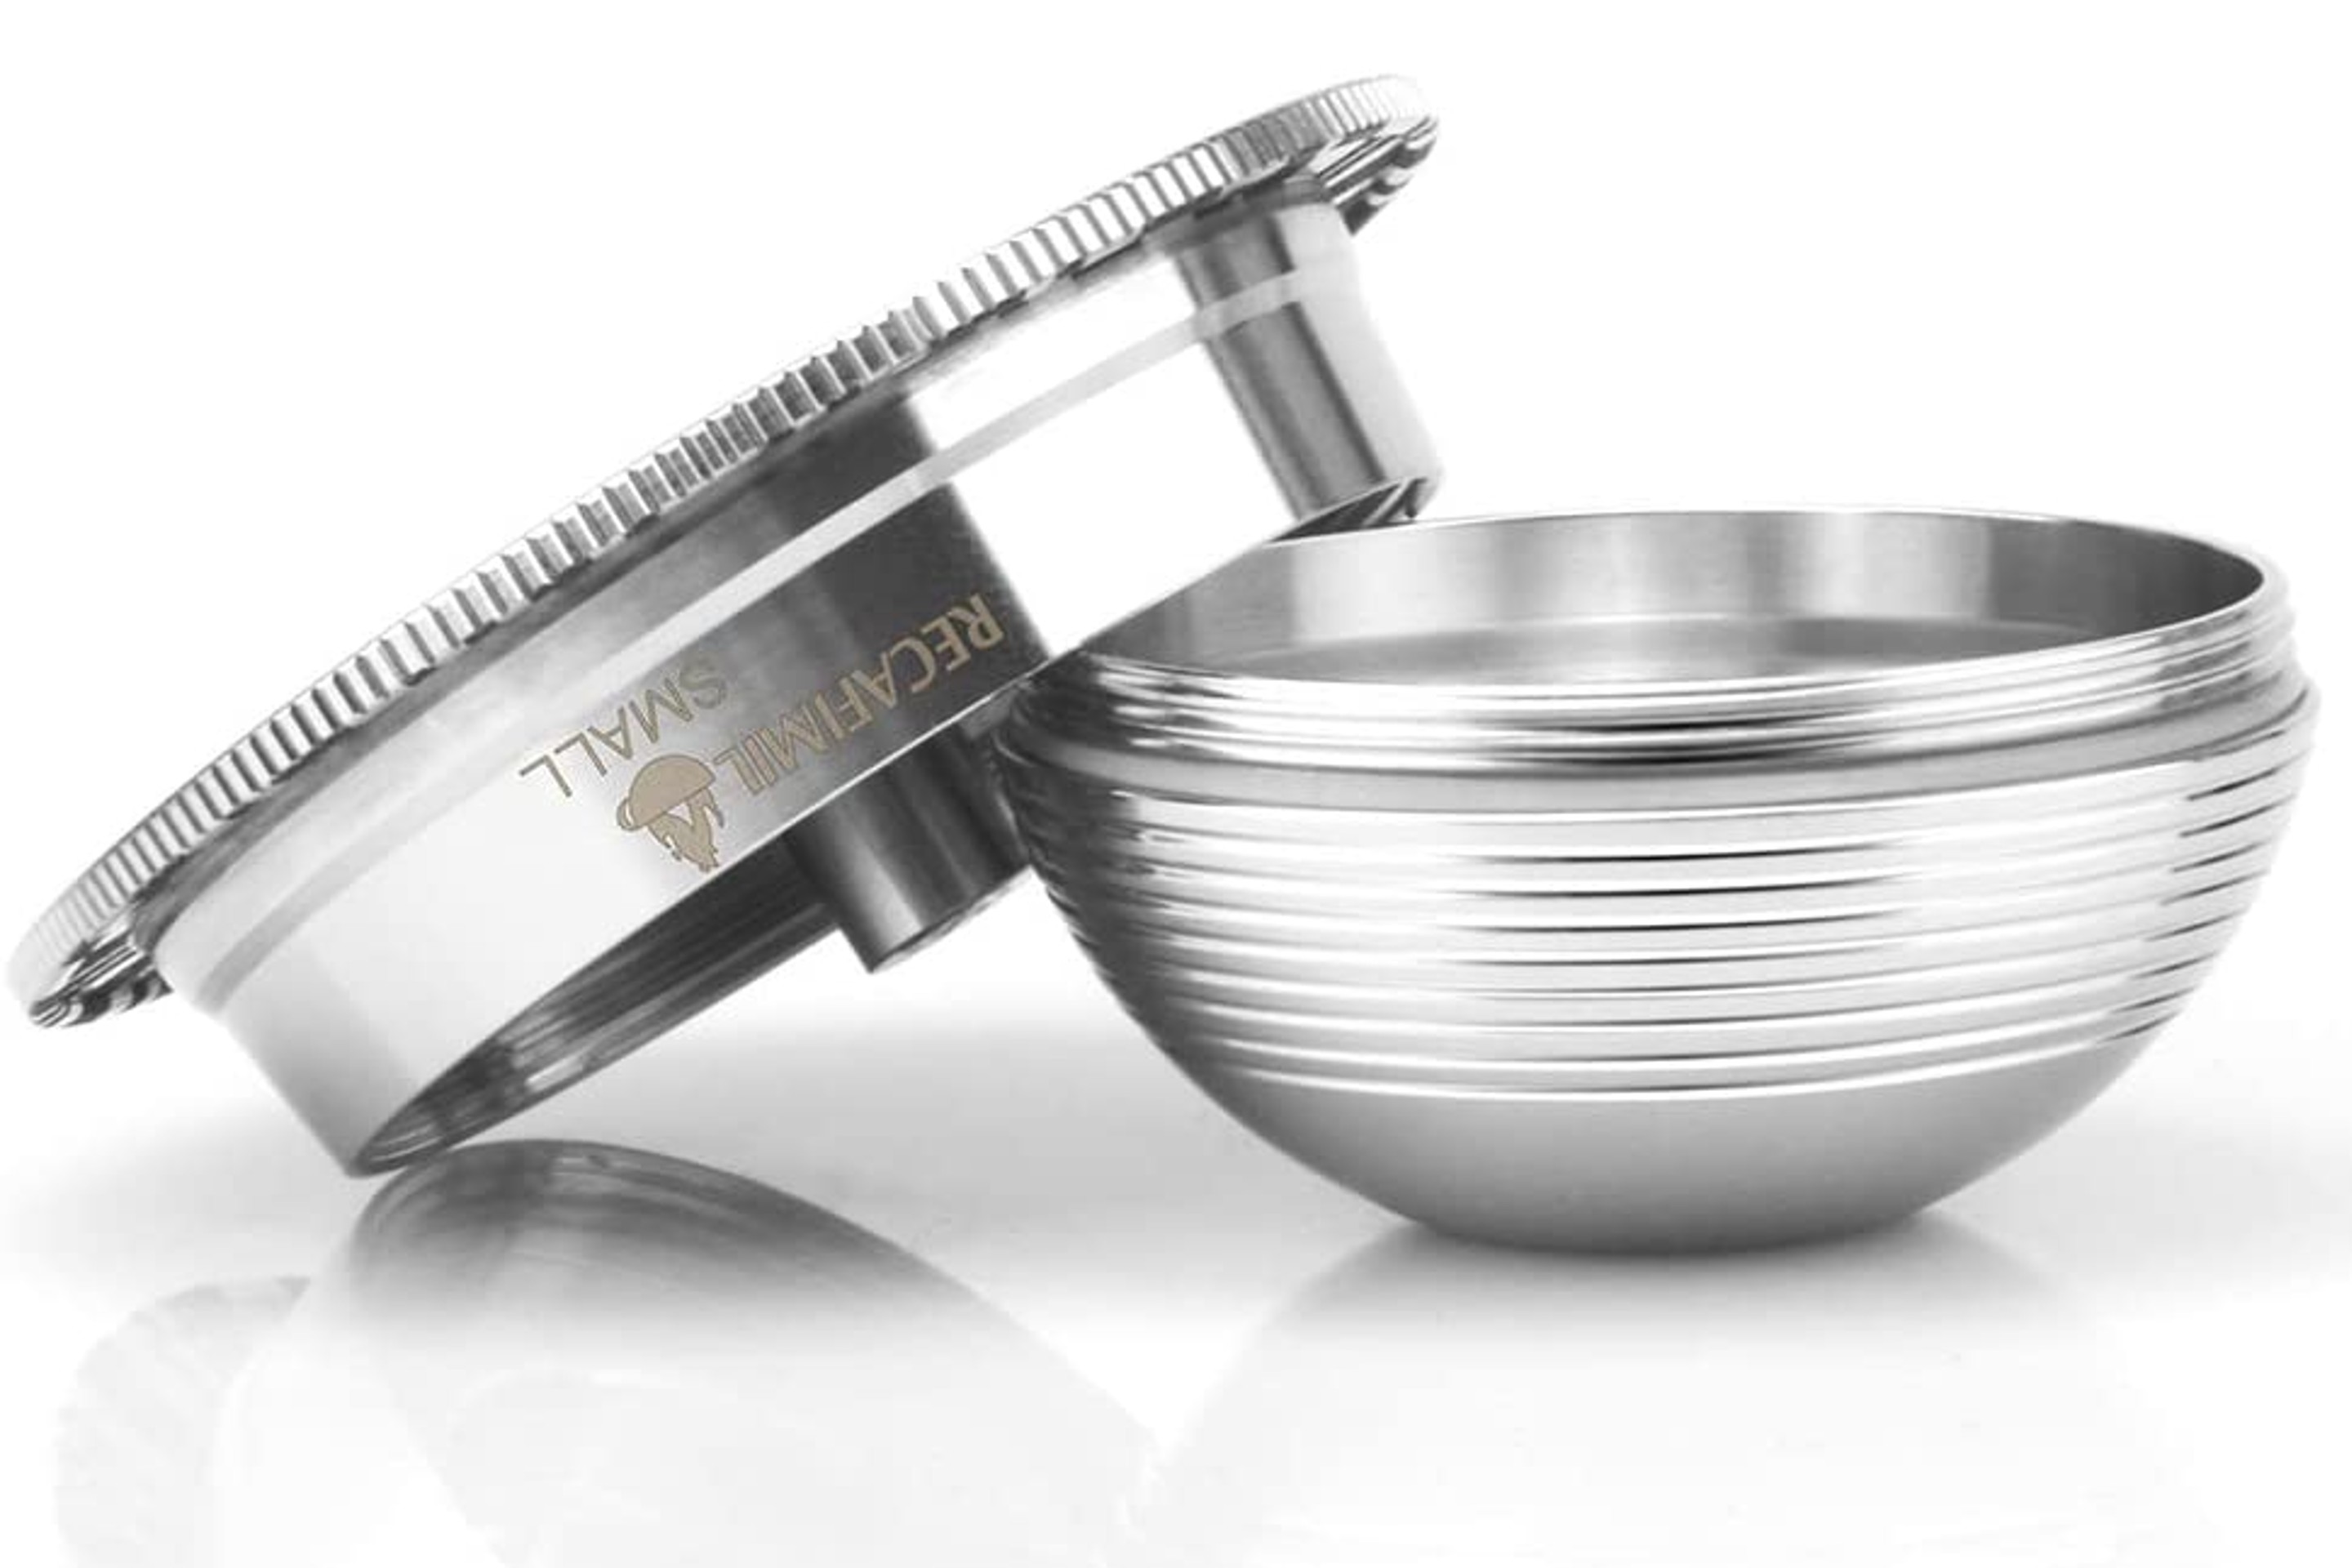 Stainless Steel Refillable Nespresso Coffee Pods